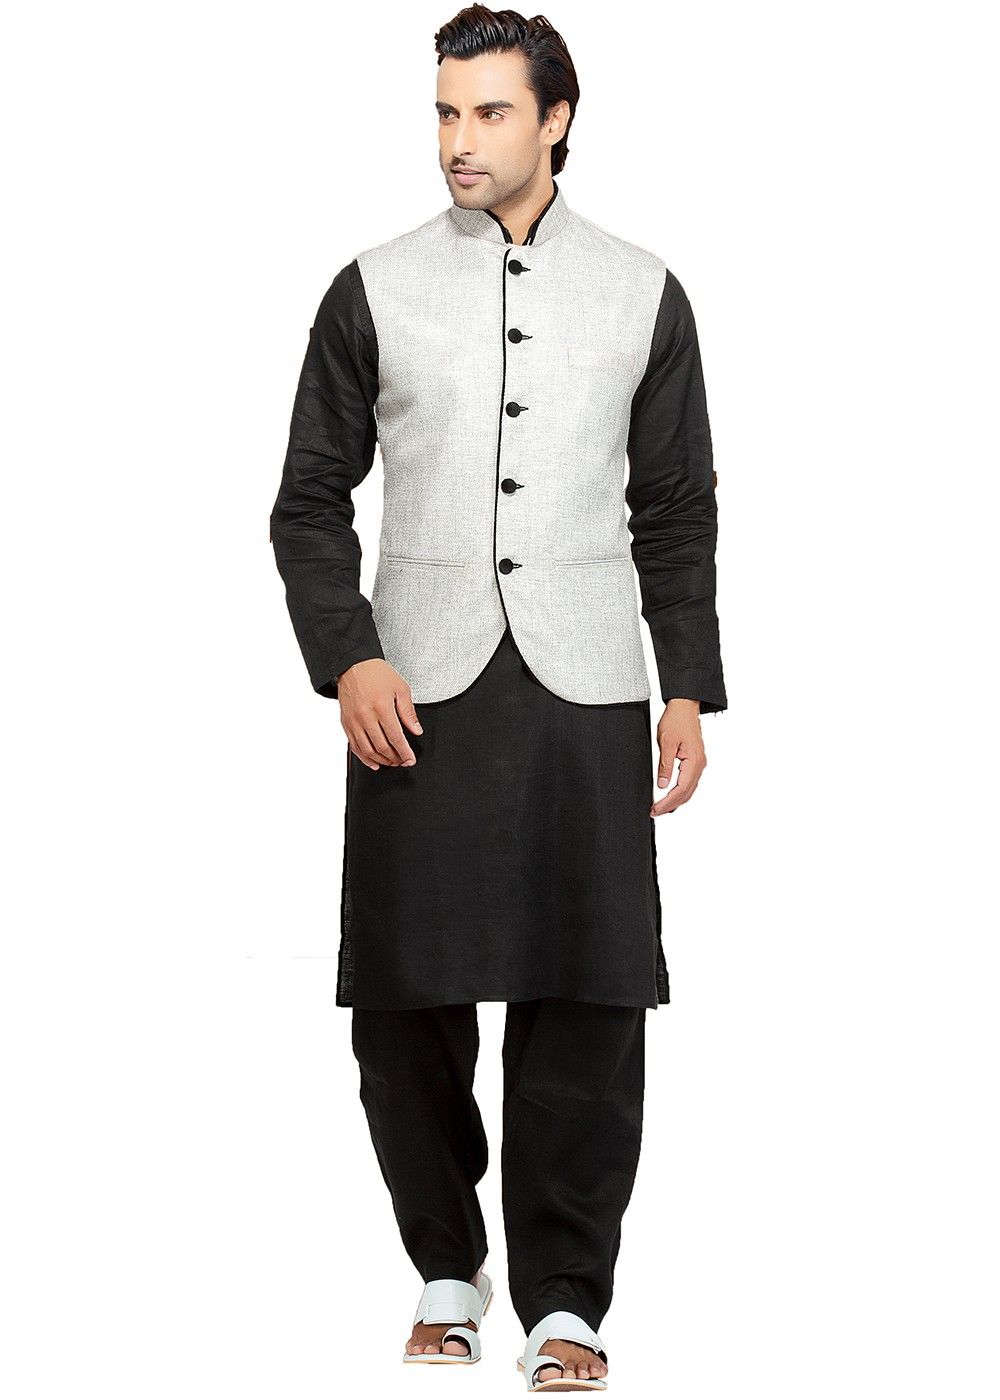 Grey And Black Color Pathani Suit